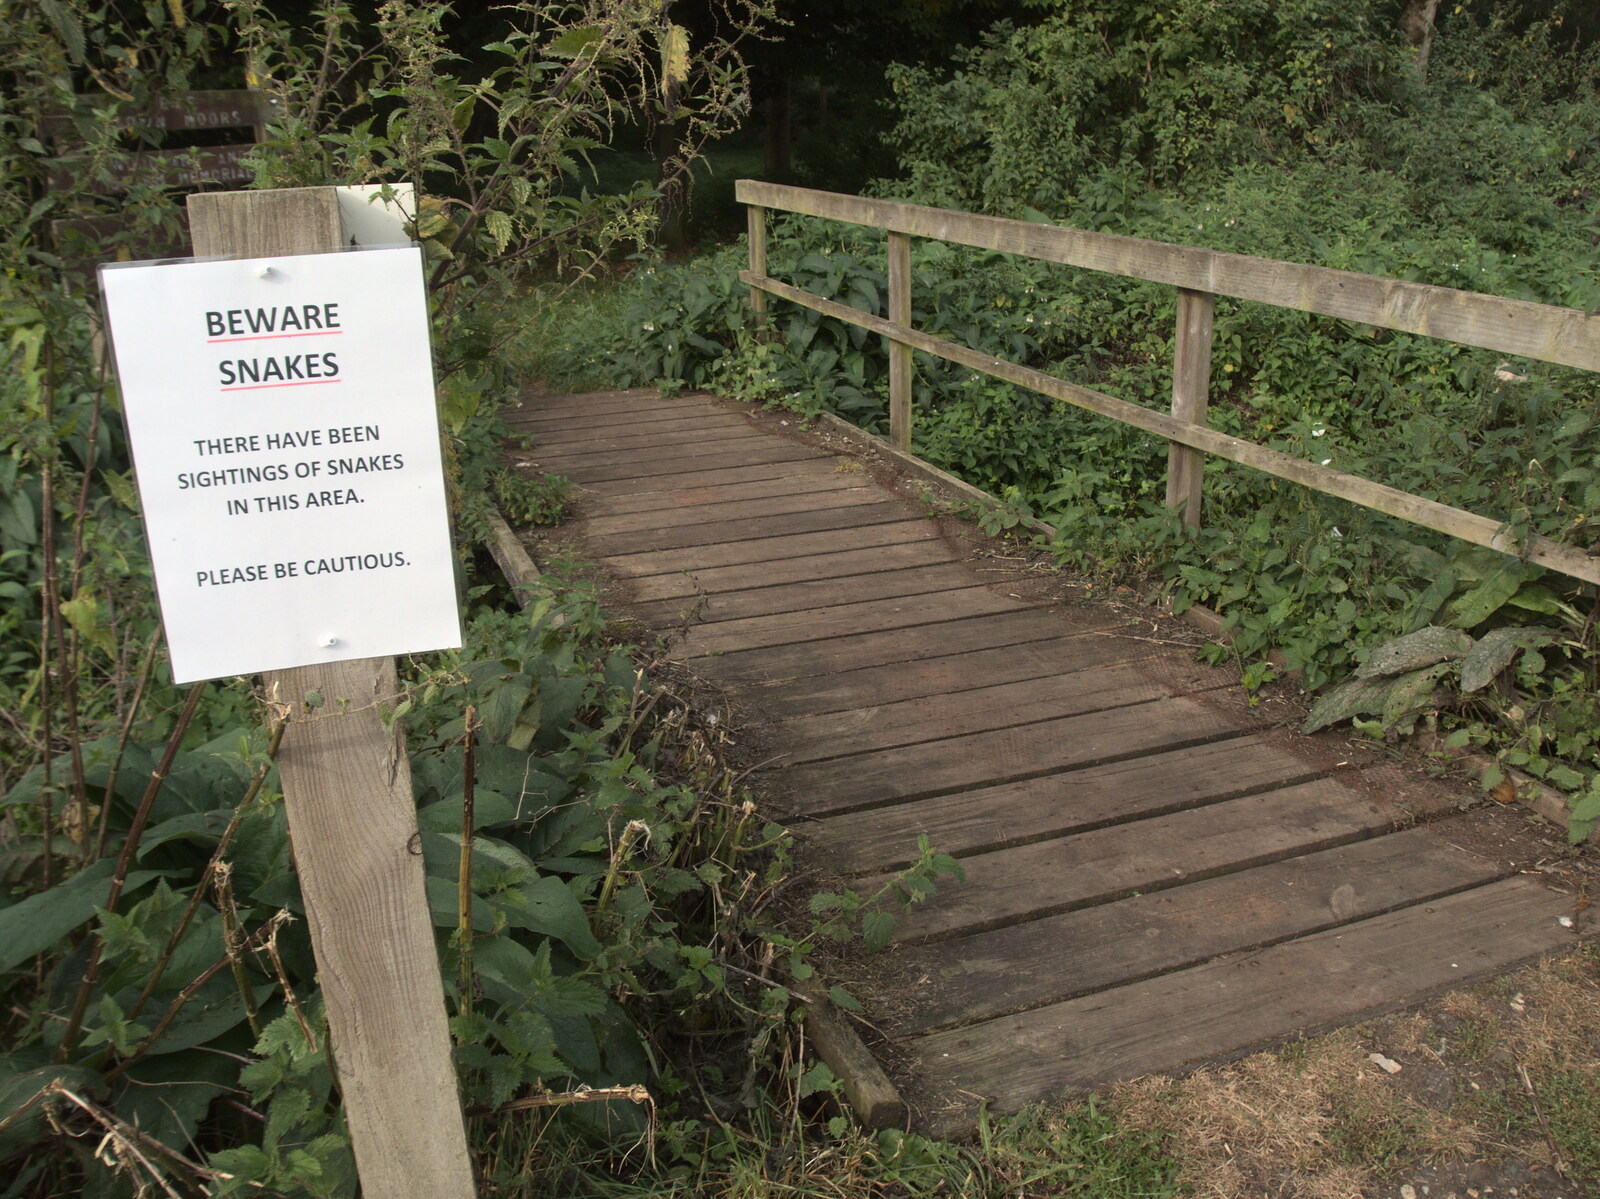 The Last Weavers Ever, Market Hill, Diss, Norfolk - 10th September 2021: Snakes have been spotted in the Town Moor woods